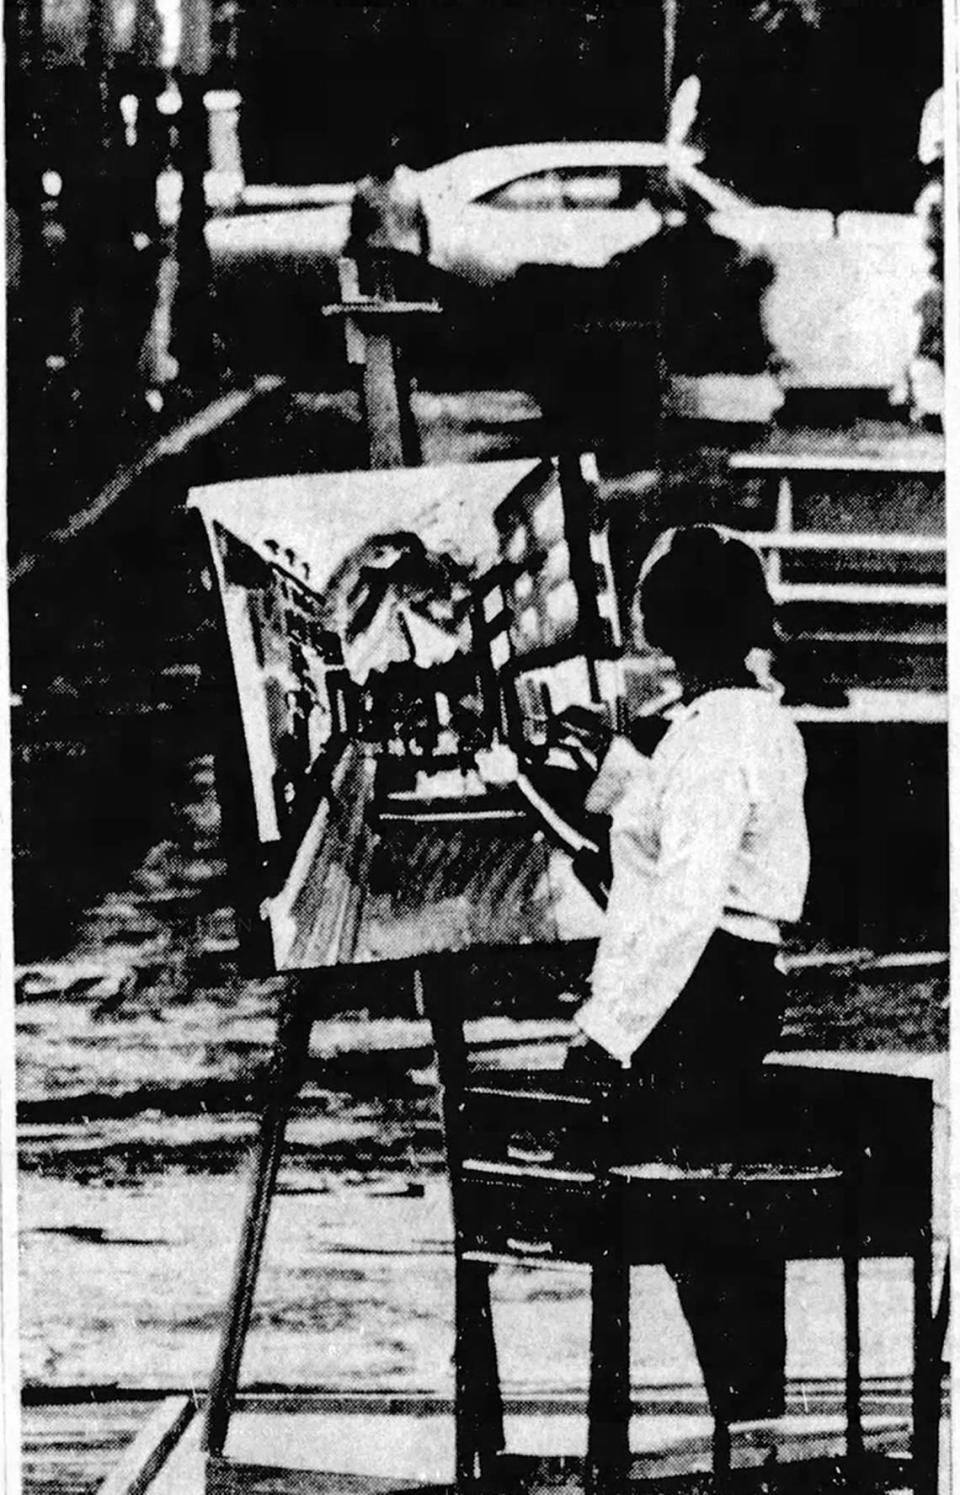 An artist braves the rain on South Allen Street during the Central Pennsylvania Festival of the Arts in 1967.